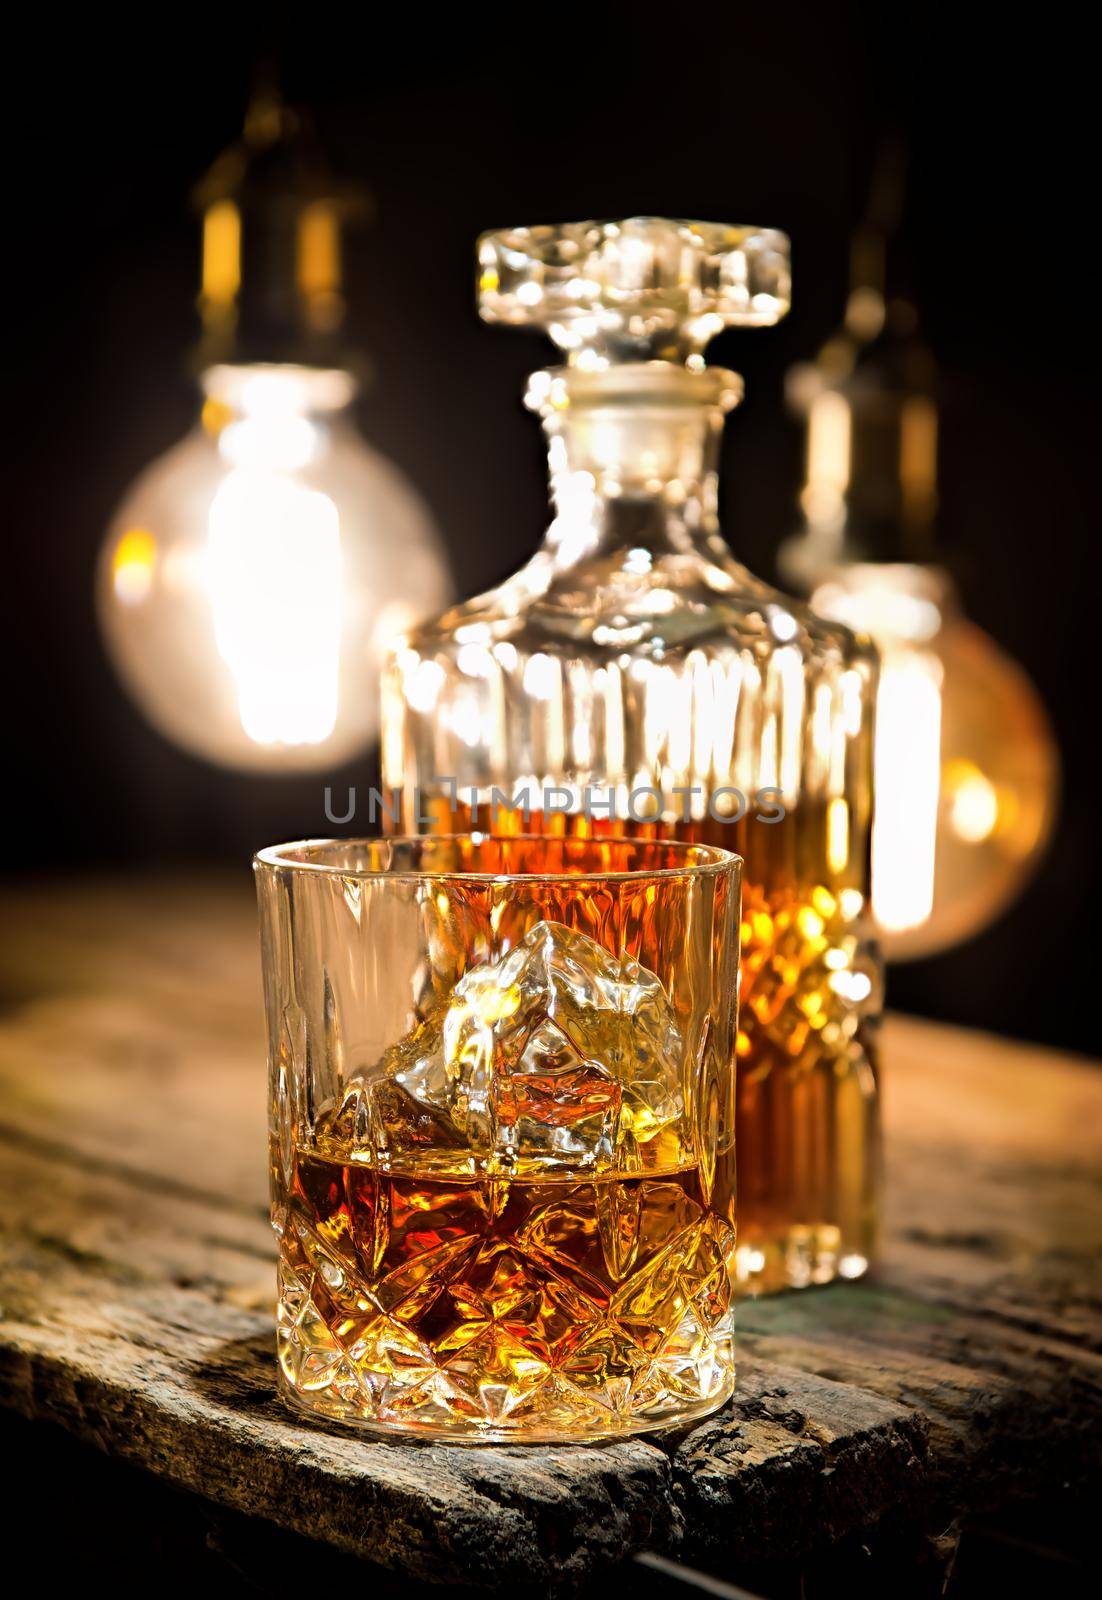 Whiskey and lamp lighting by Givaga